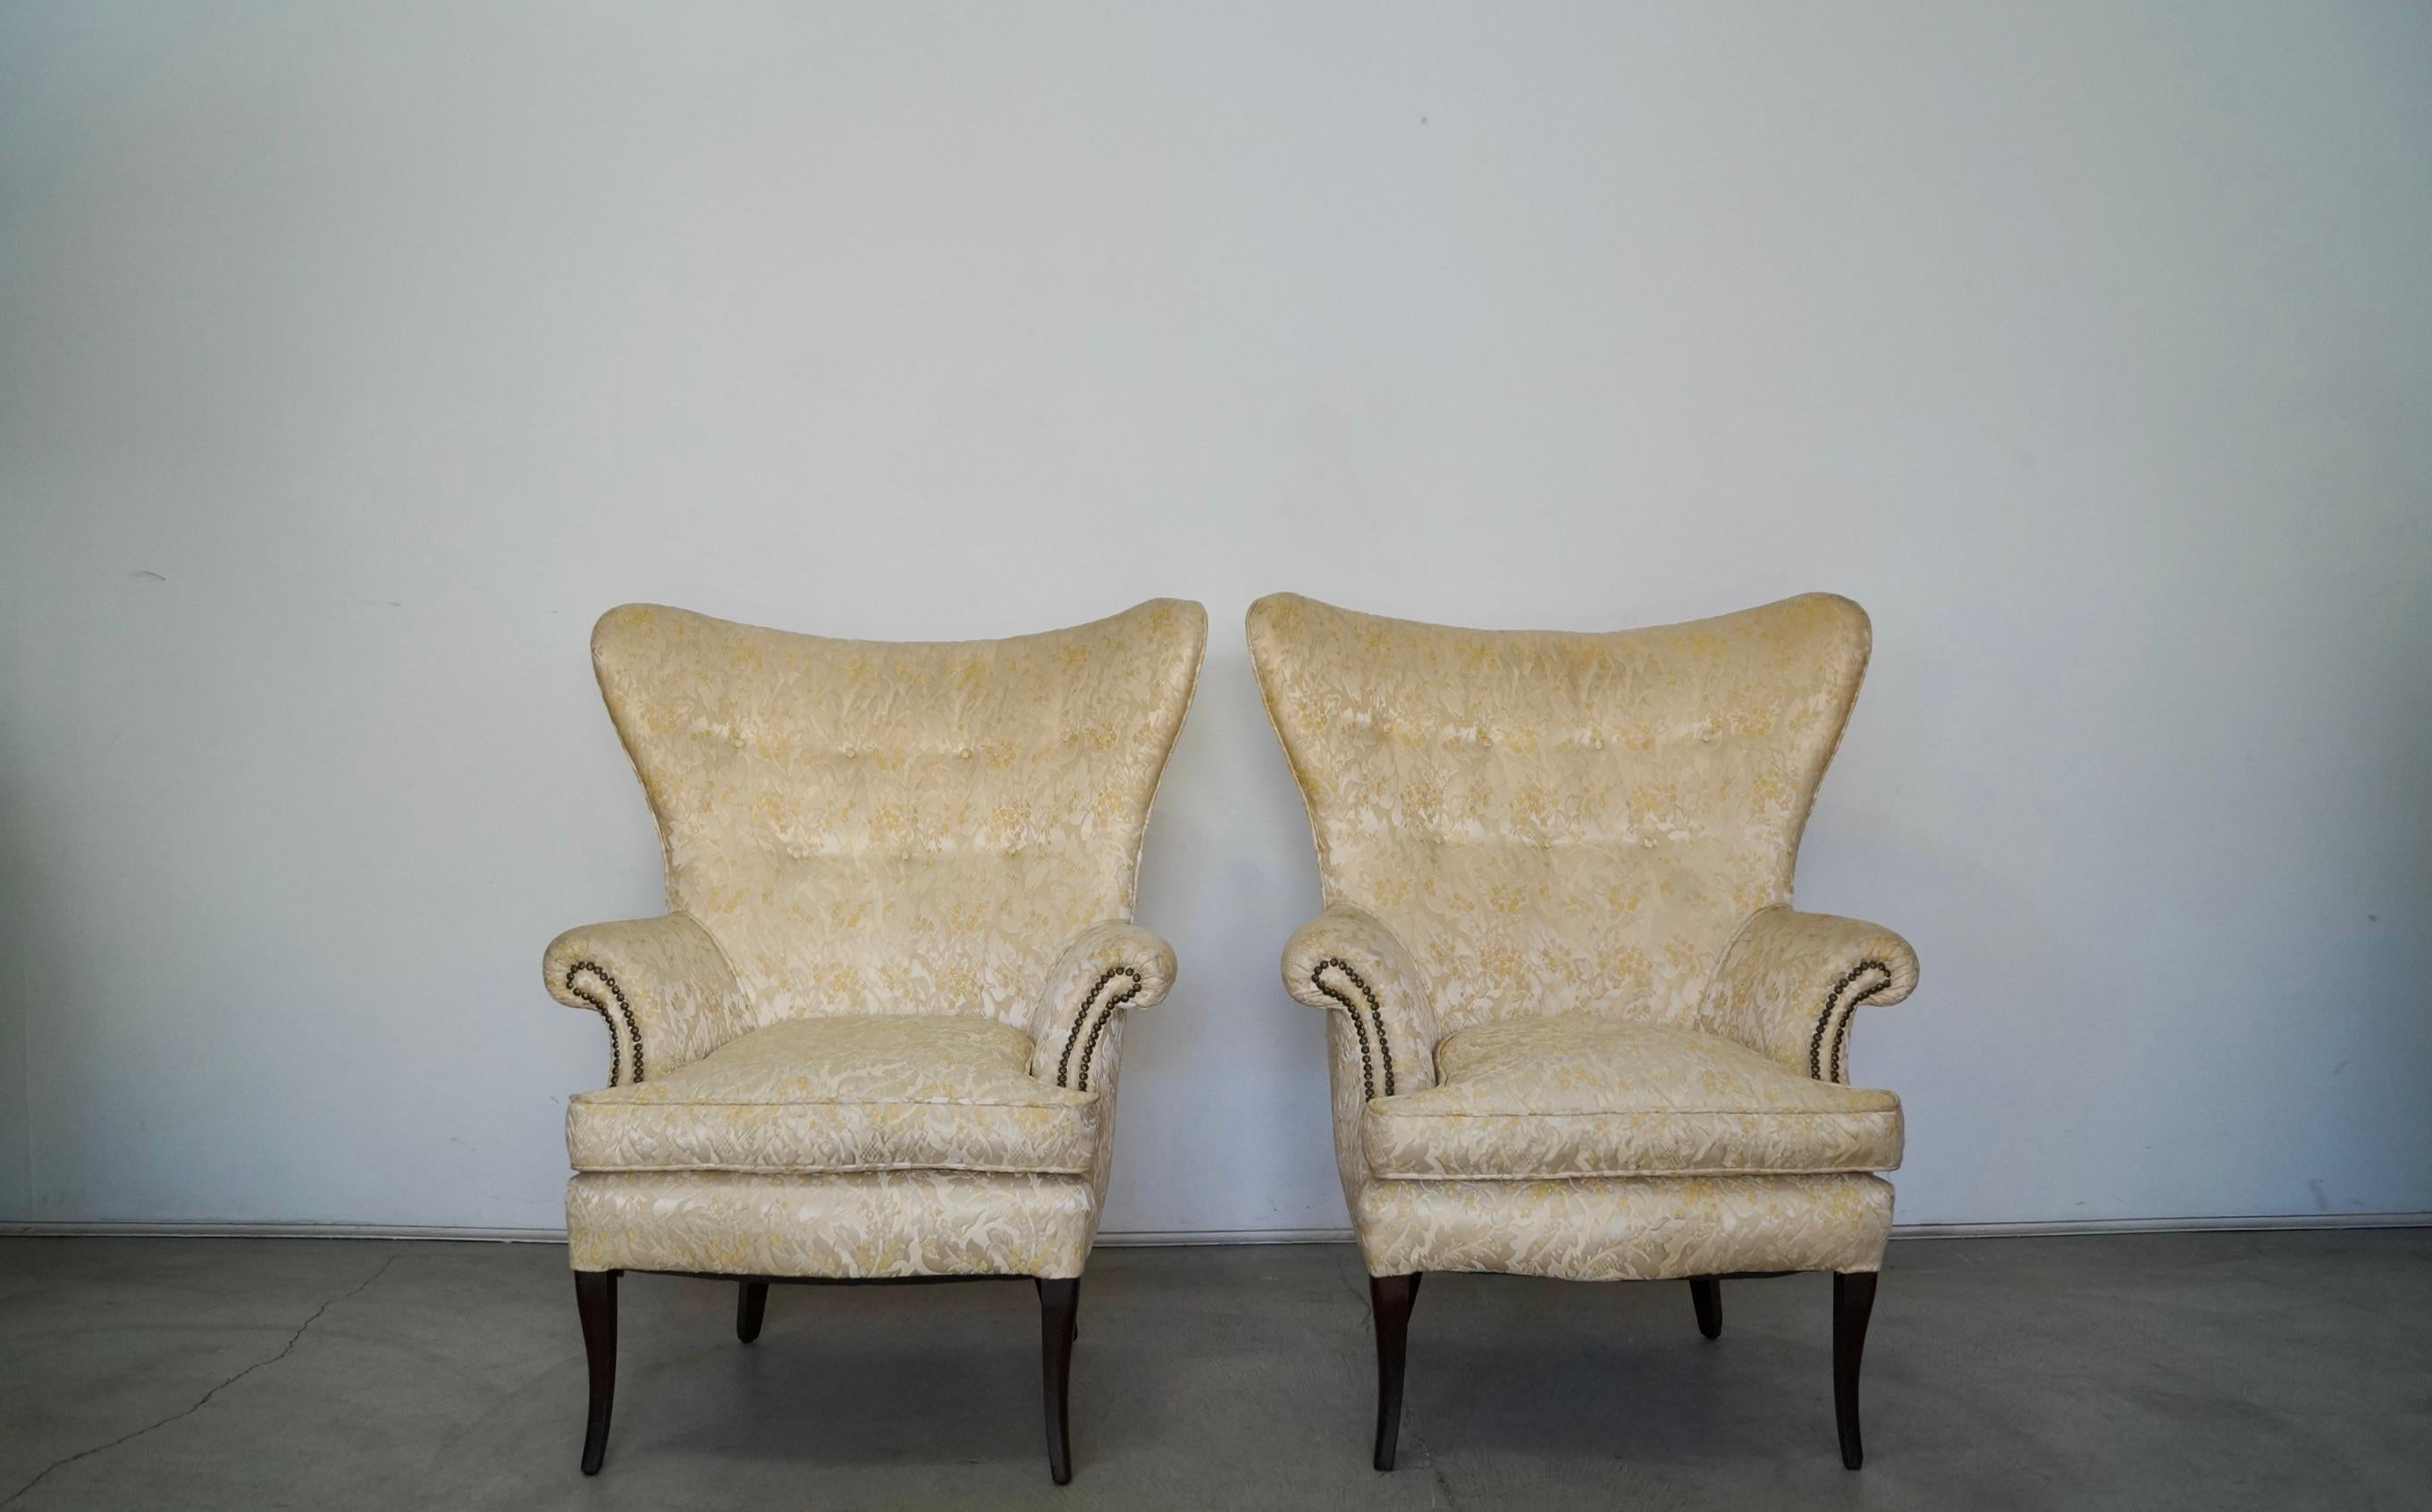 Pair of 1950s Mid-Century Modern wingback chairs for sale. These are incredible, and have a butterfly wingback, and very well made. The frame seats have coil springs. The seat cushions also have coil springs. They have saber legs finished in a dark